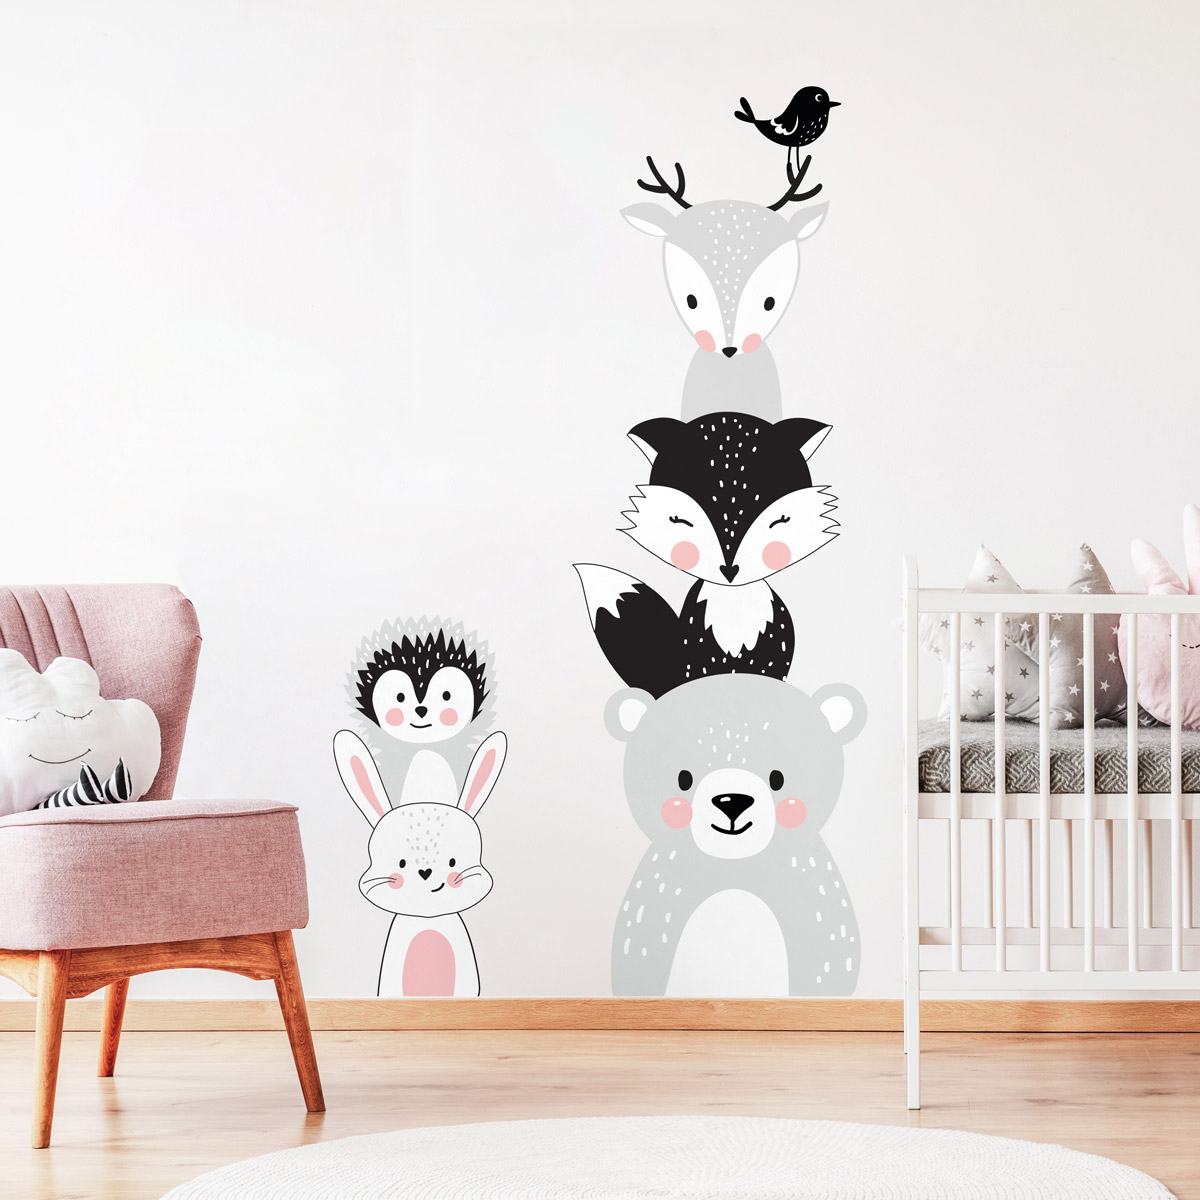 https://www.ambiance-sticker.com/images/Image/stickers-chambre-enfant-animaux-loufoques-1-ambiance-sticker-col-pl-RV-A193.jpg